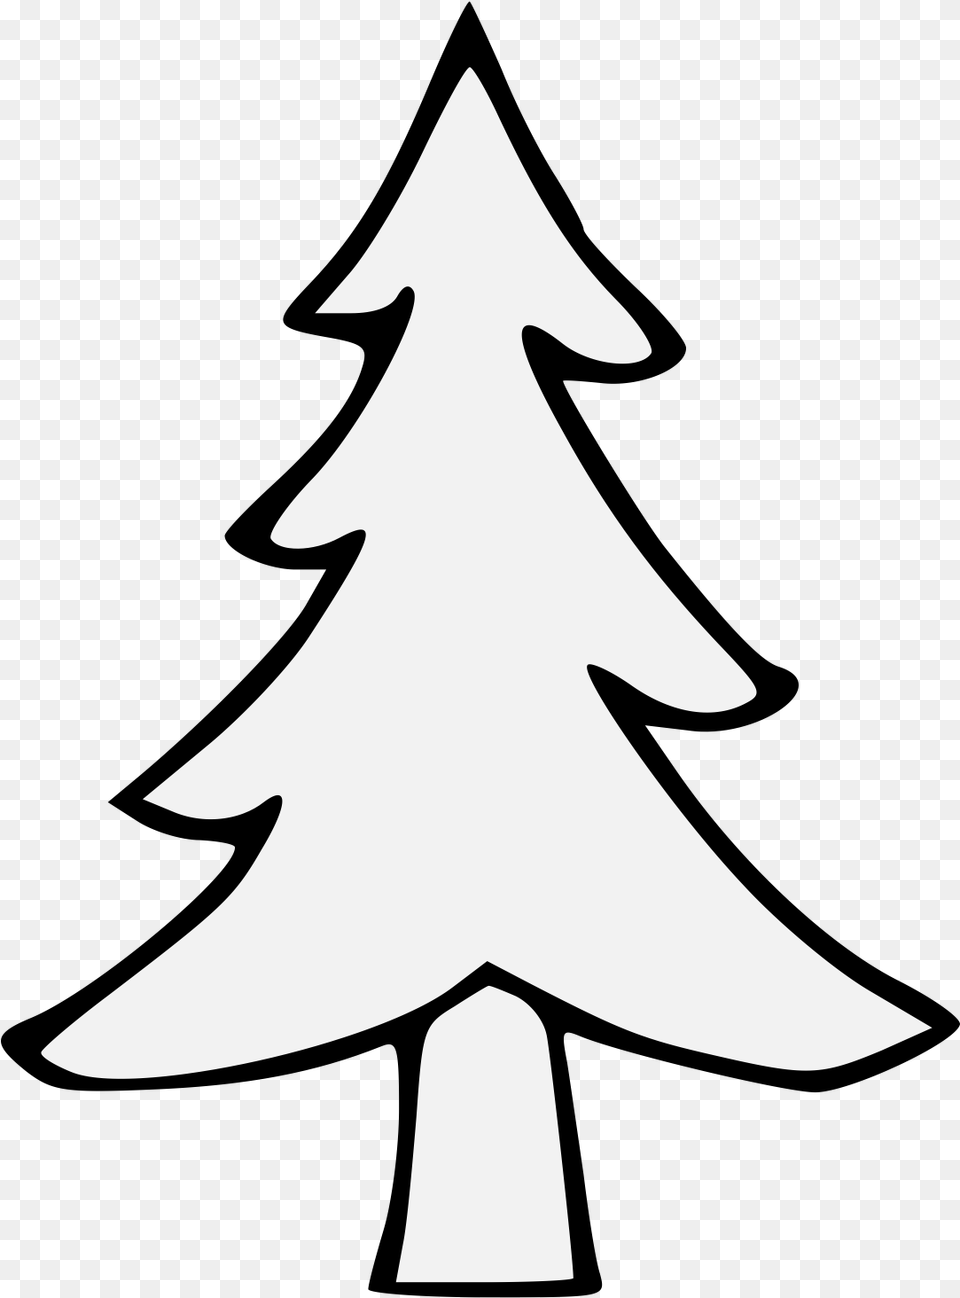 Black And White Christmas Tree Clipart, Stencil, Animal, Fish, Sea Life Free Transparent Png